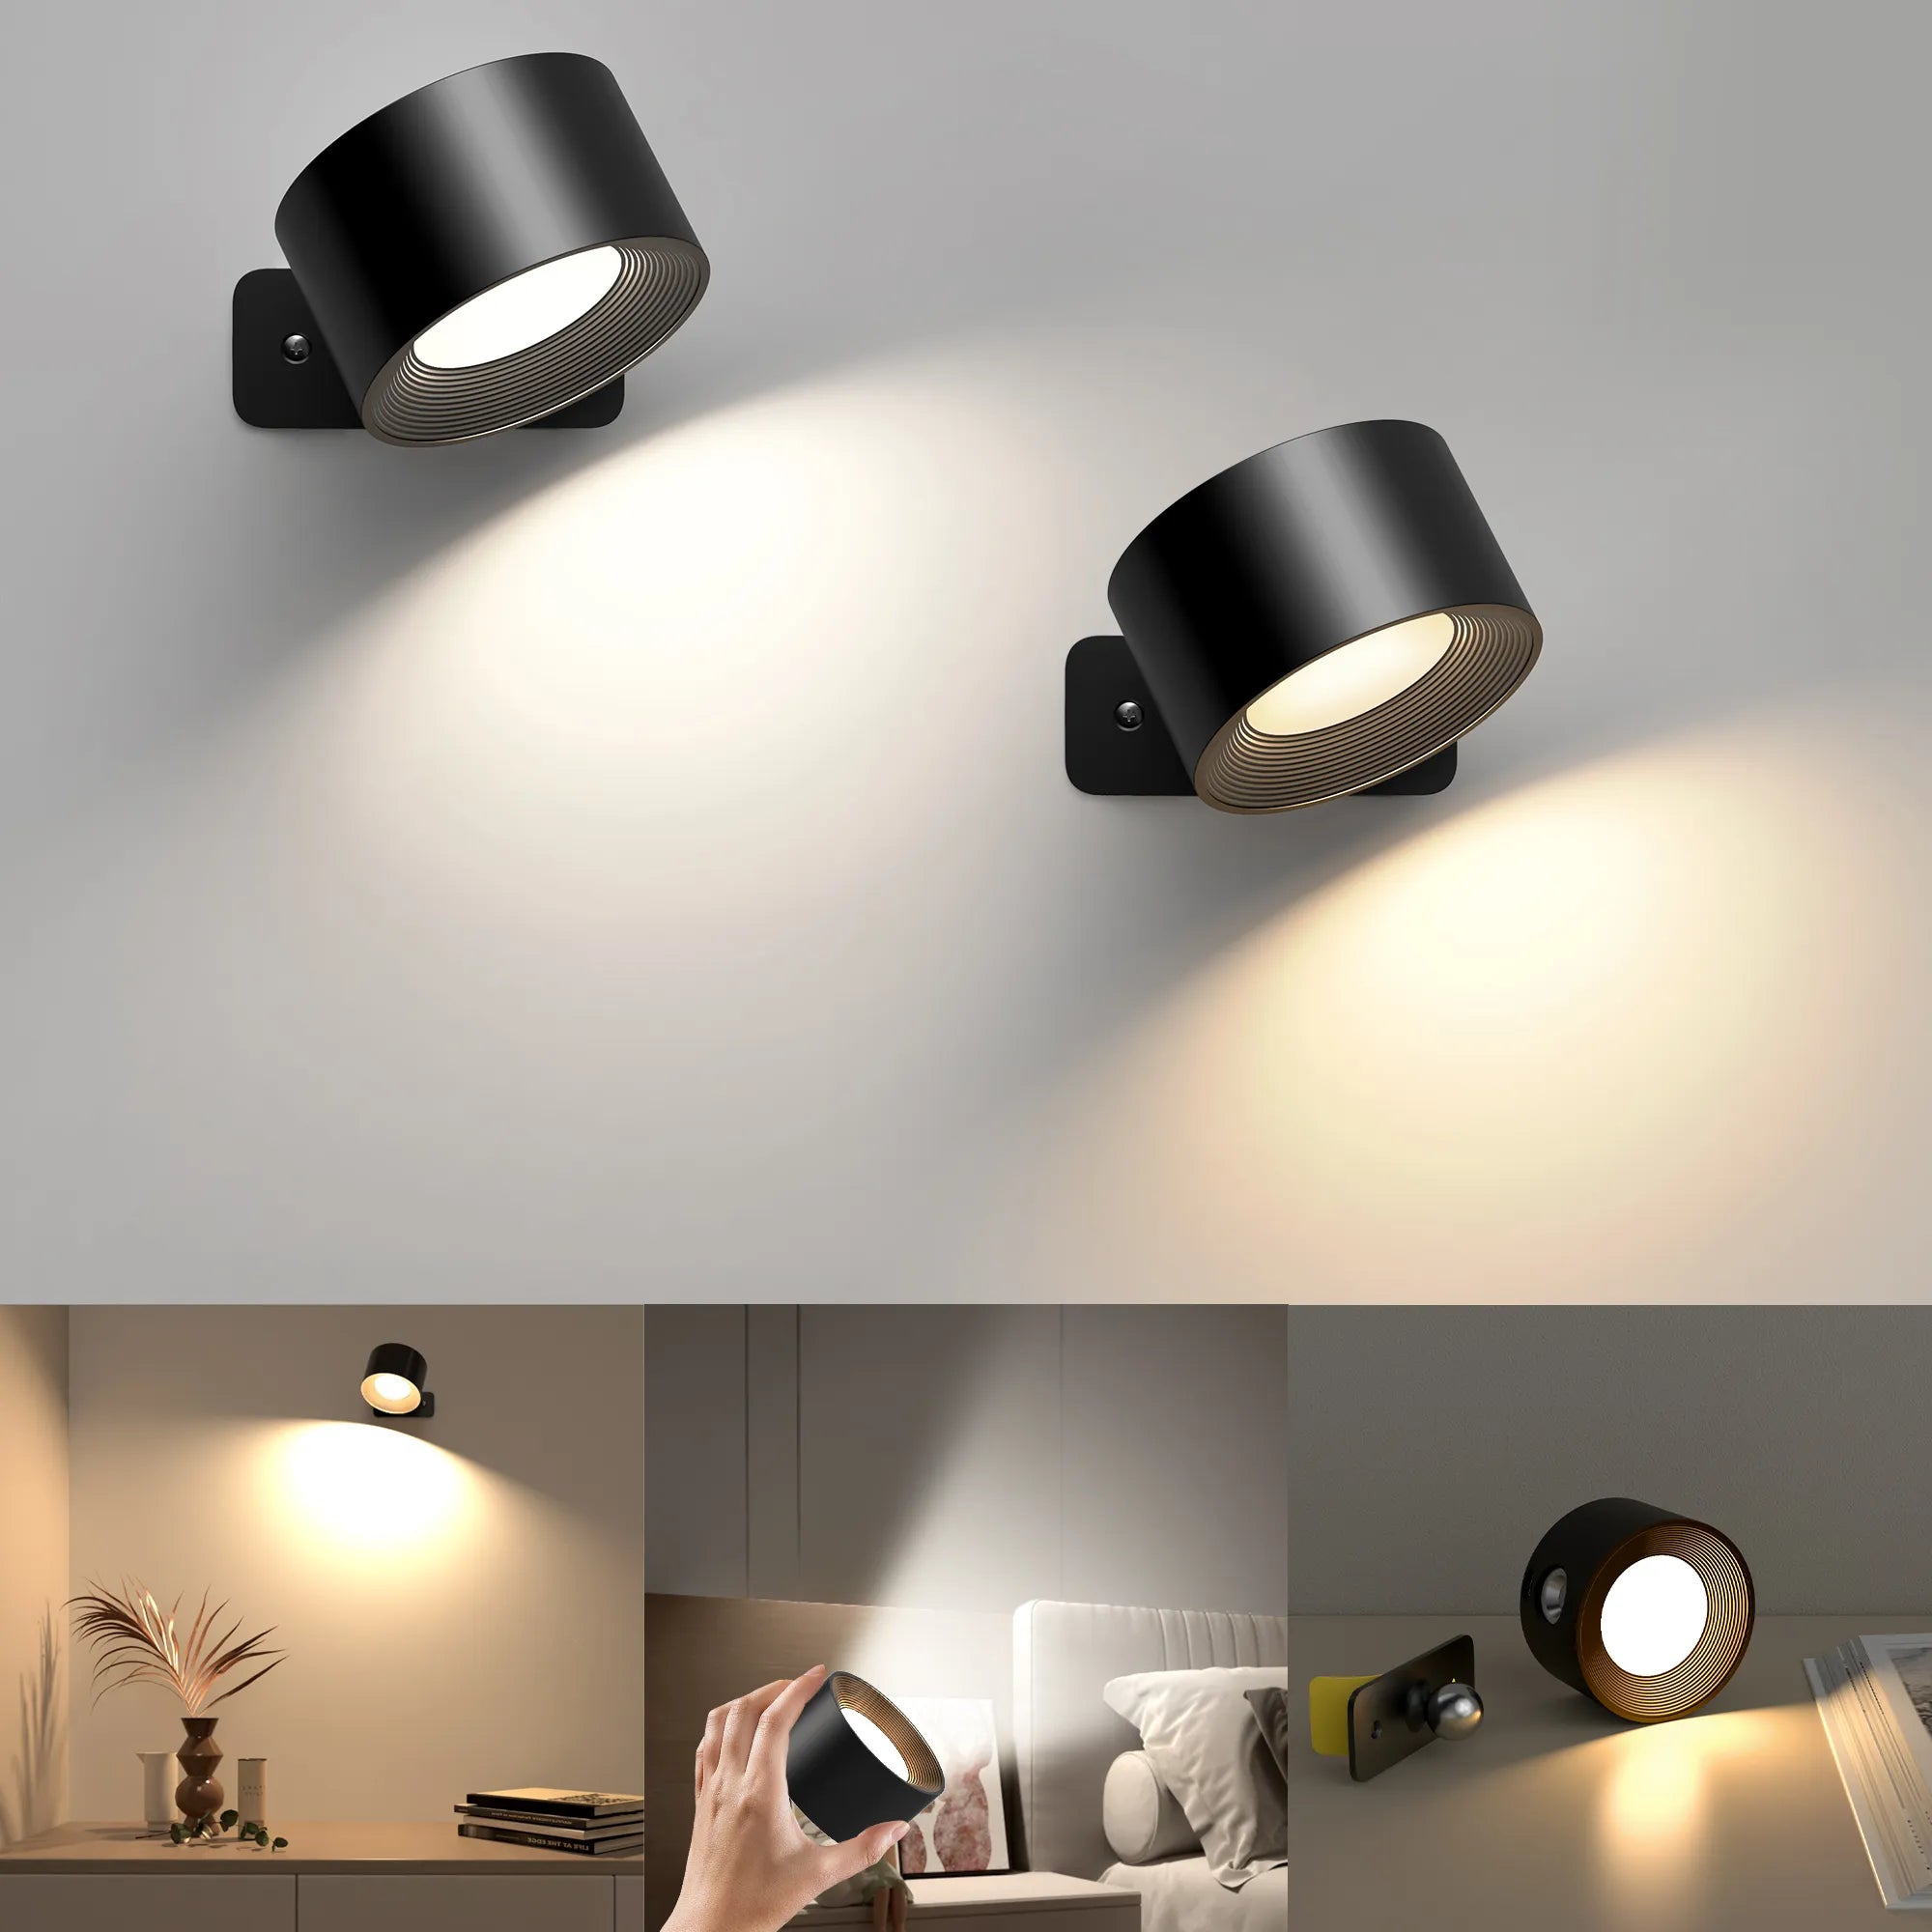 LED Wall Sconces Light - 3 Brightness & Color Modes, 360° Rotatable